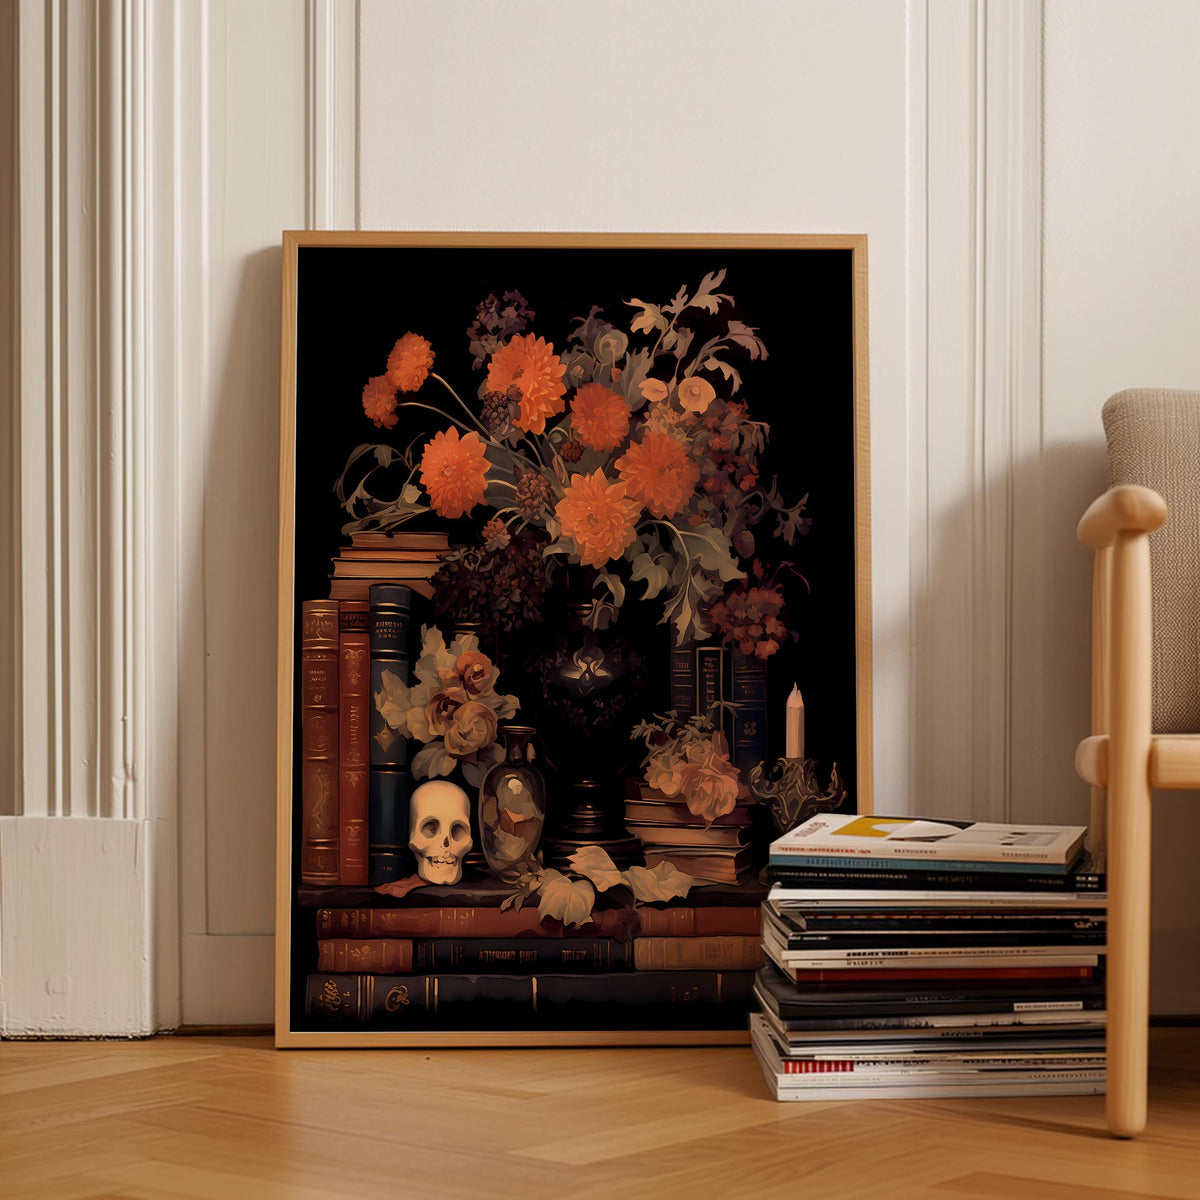 a picture of a vase of flowers and a skull on a bookshelf